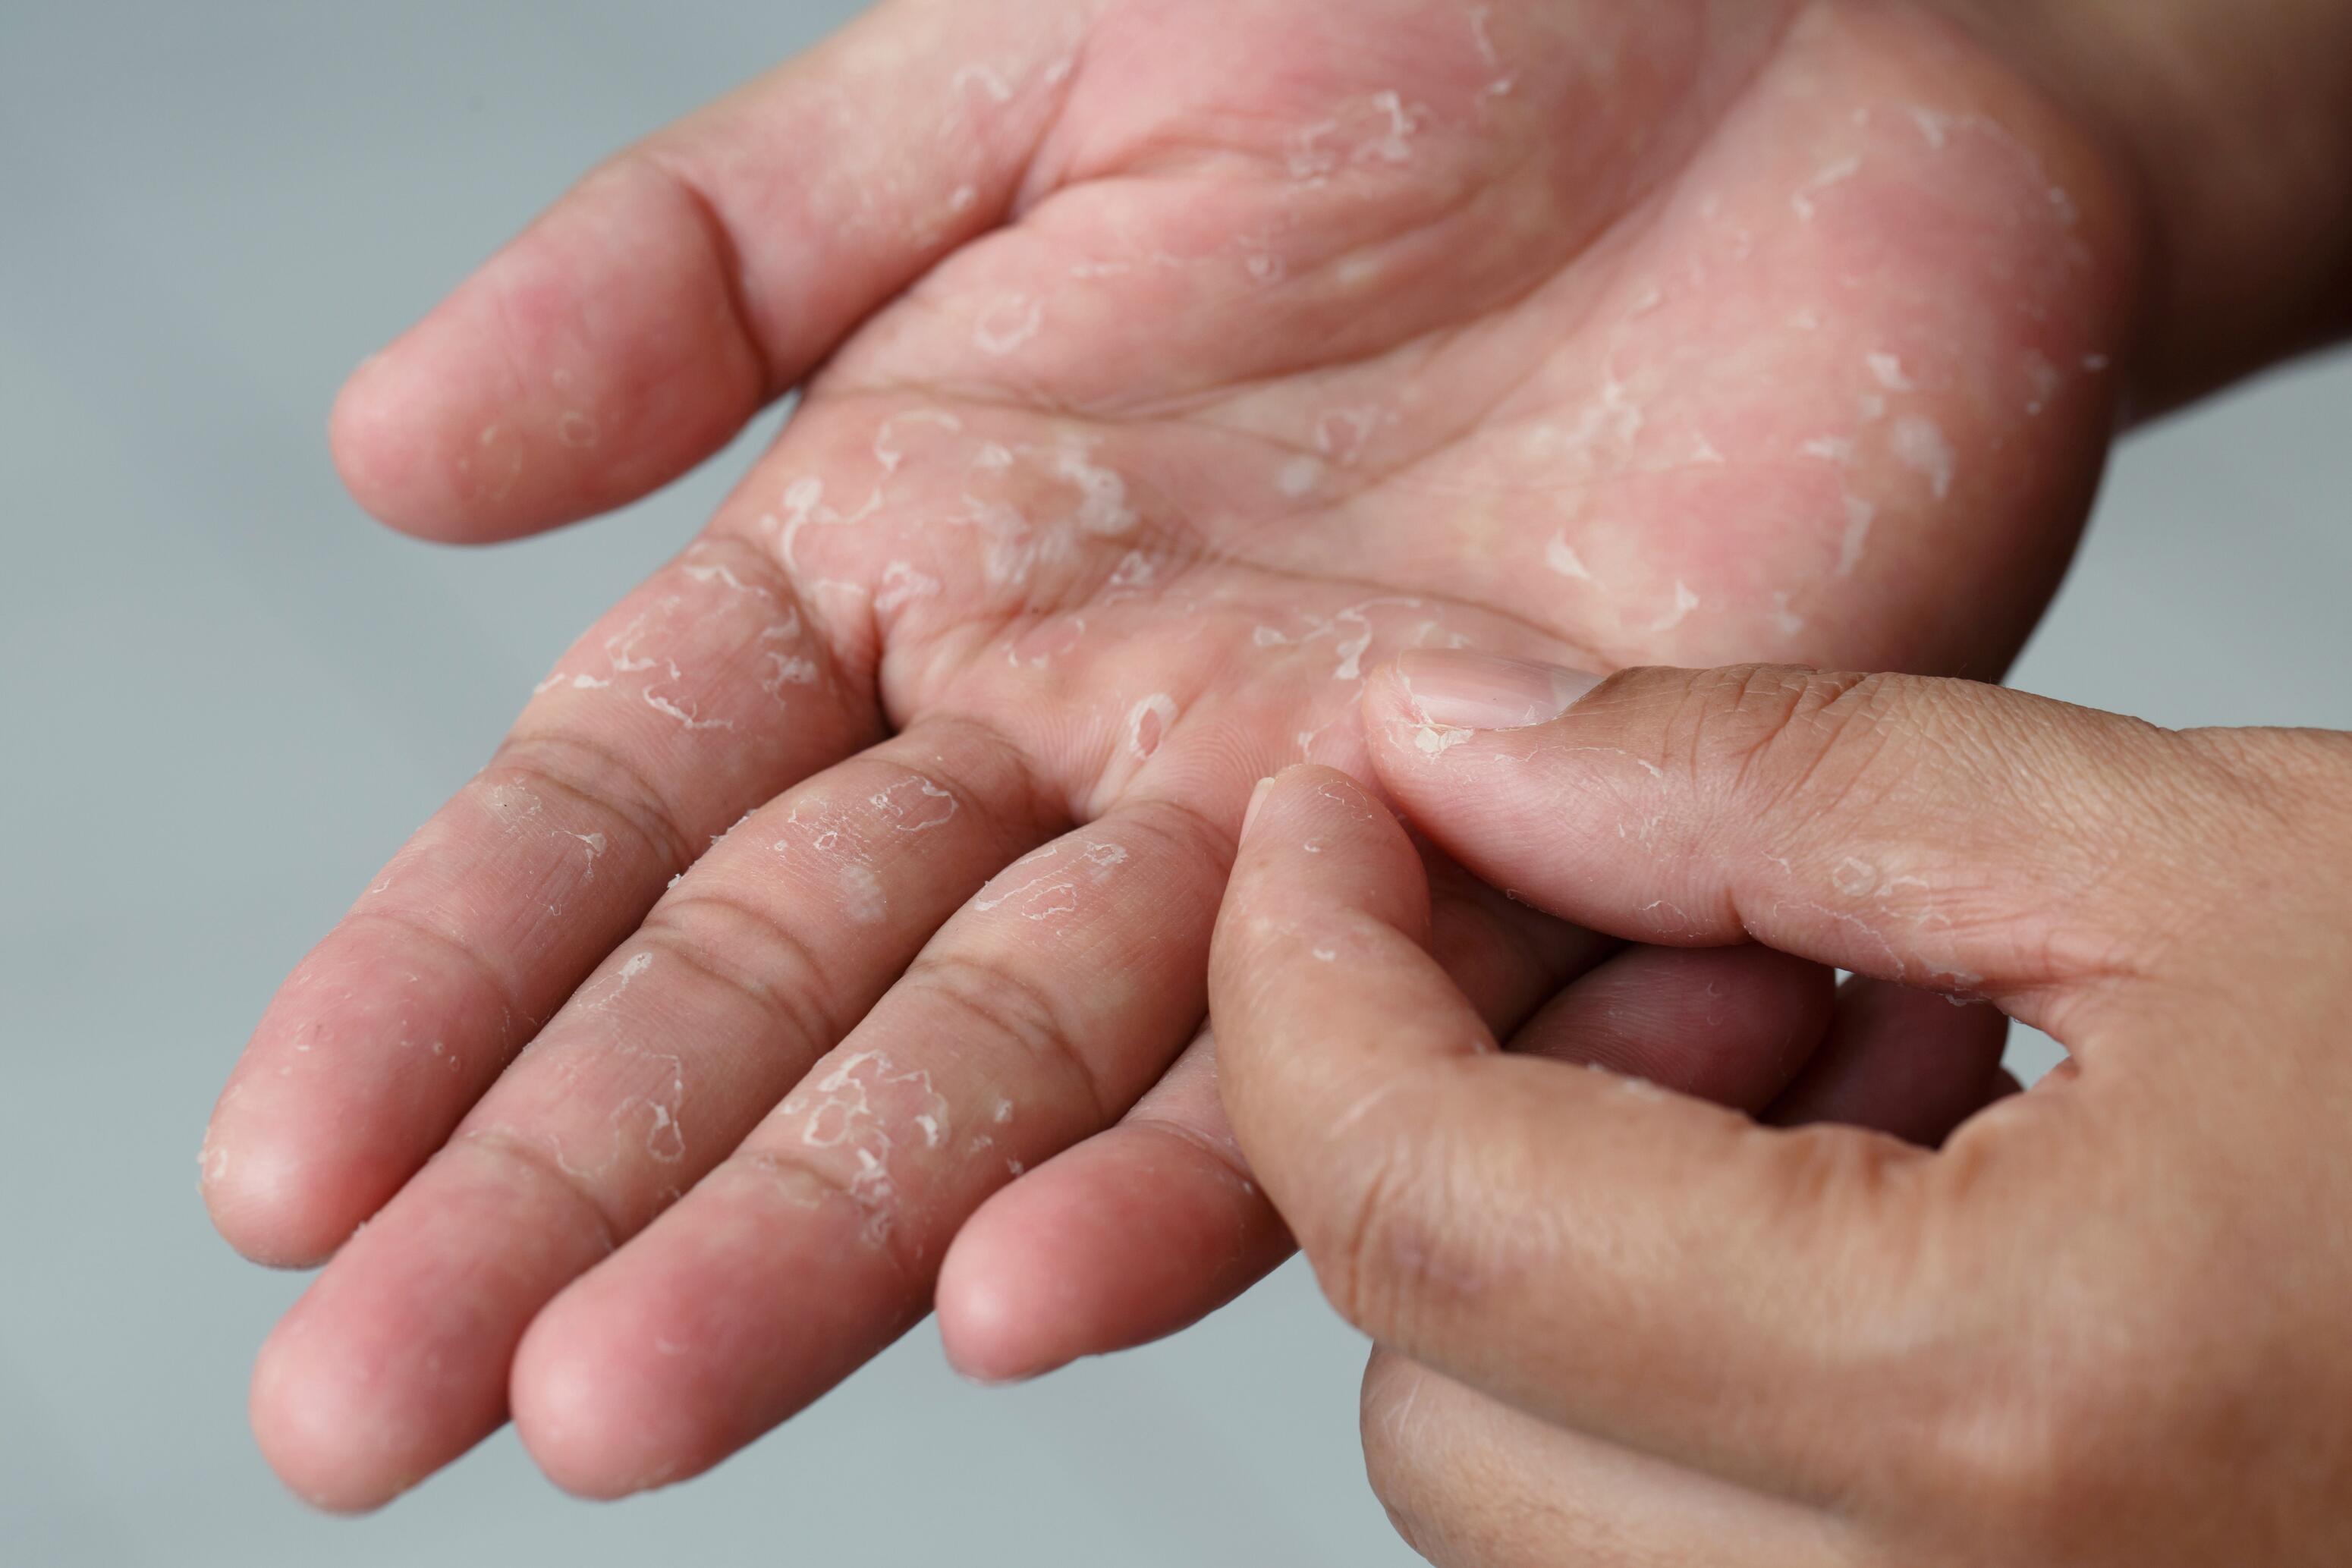 Other types of eczema